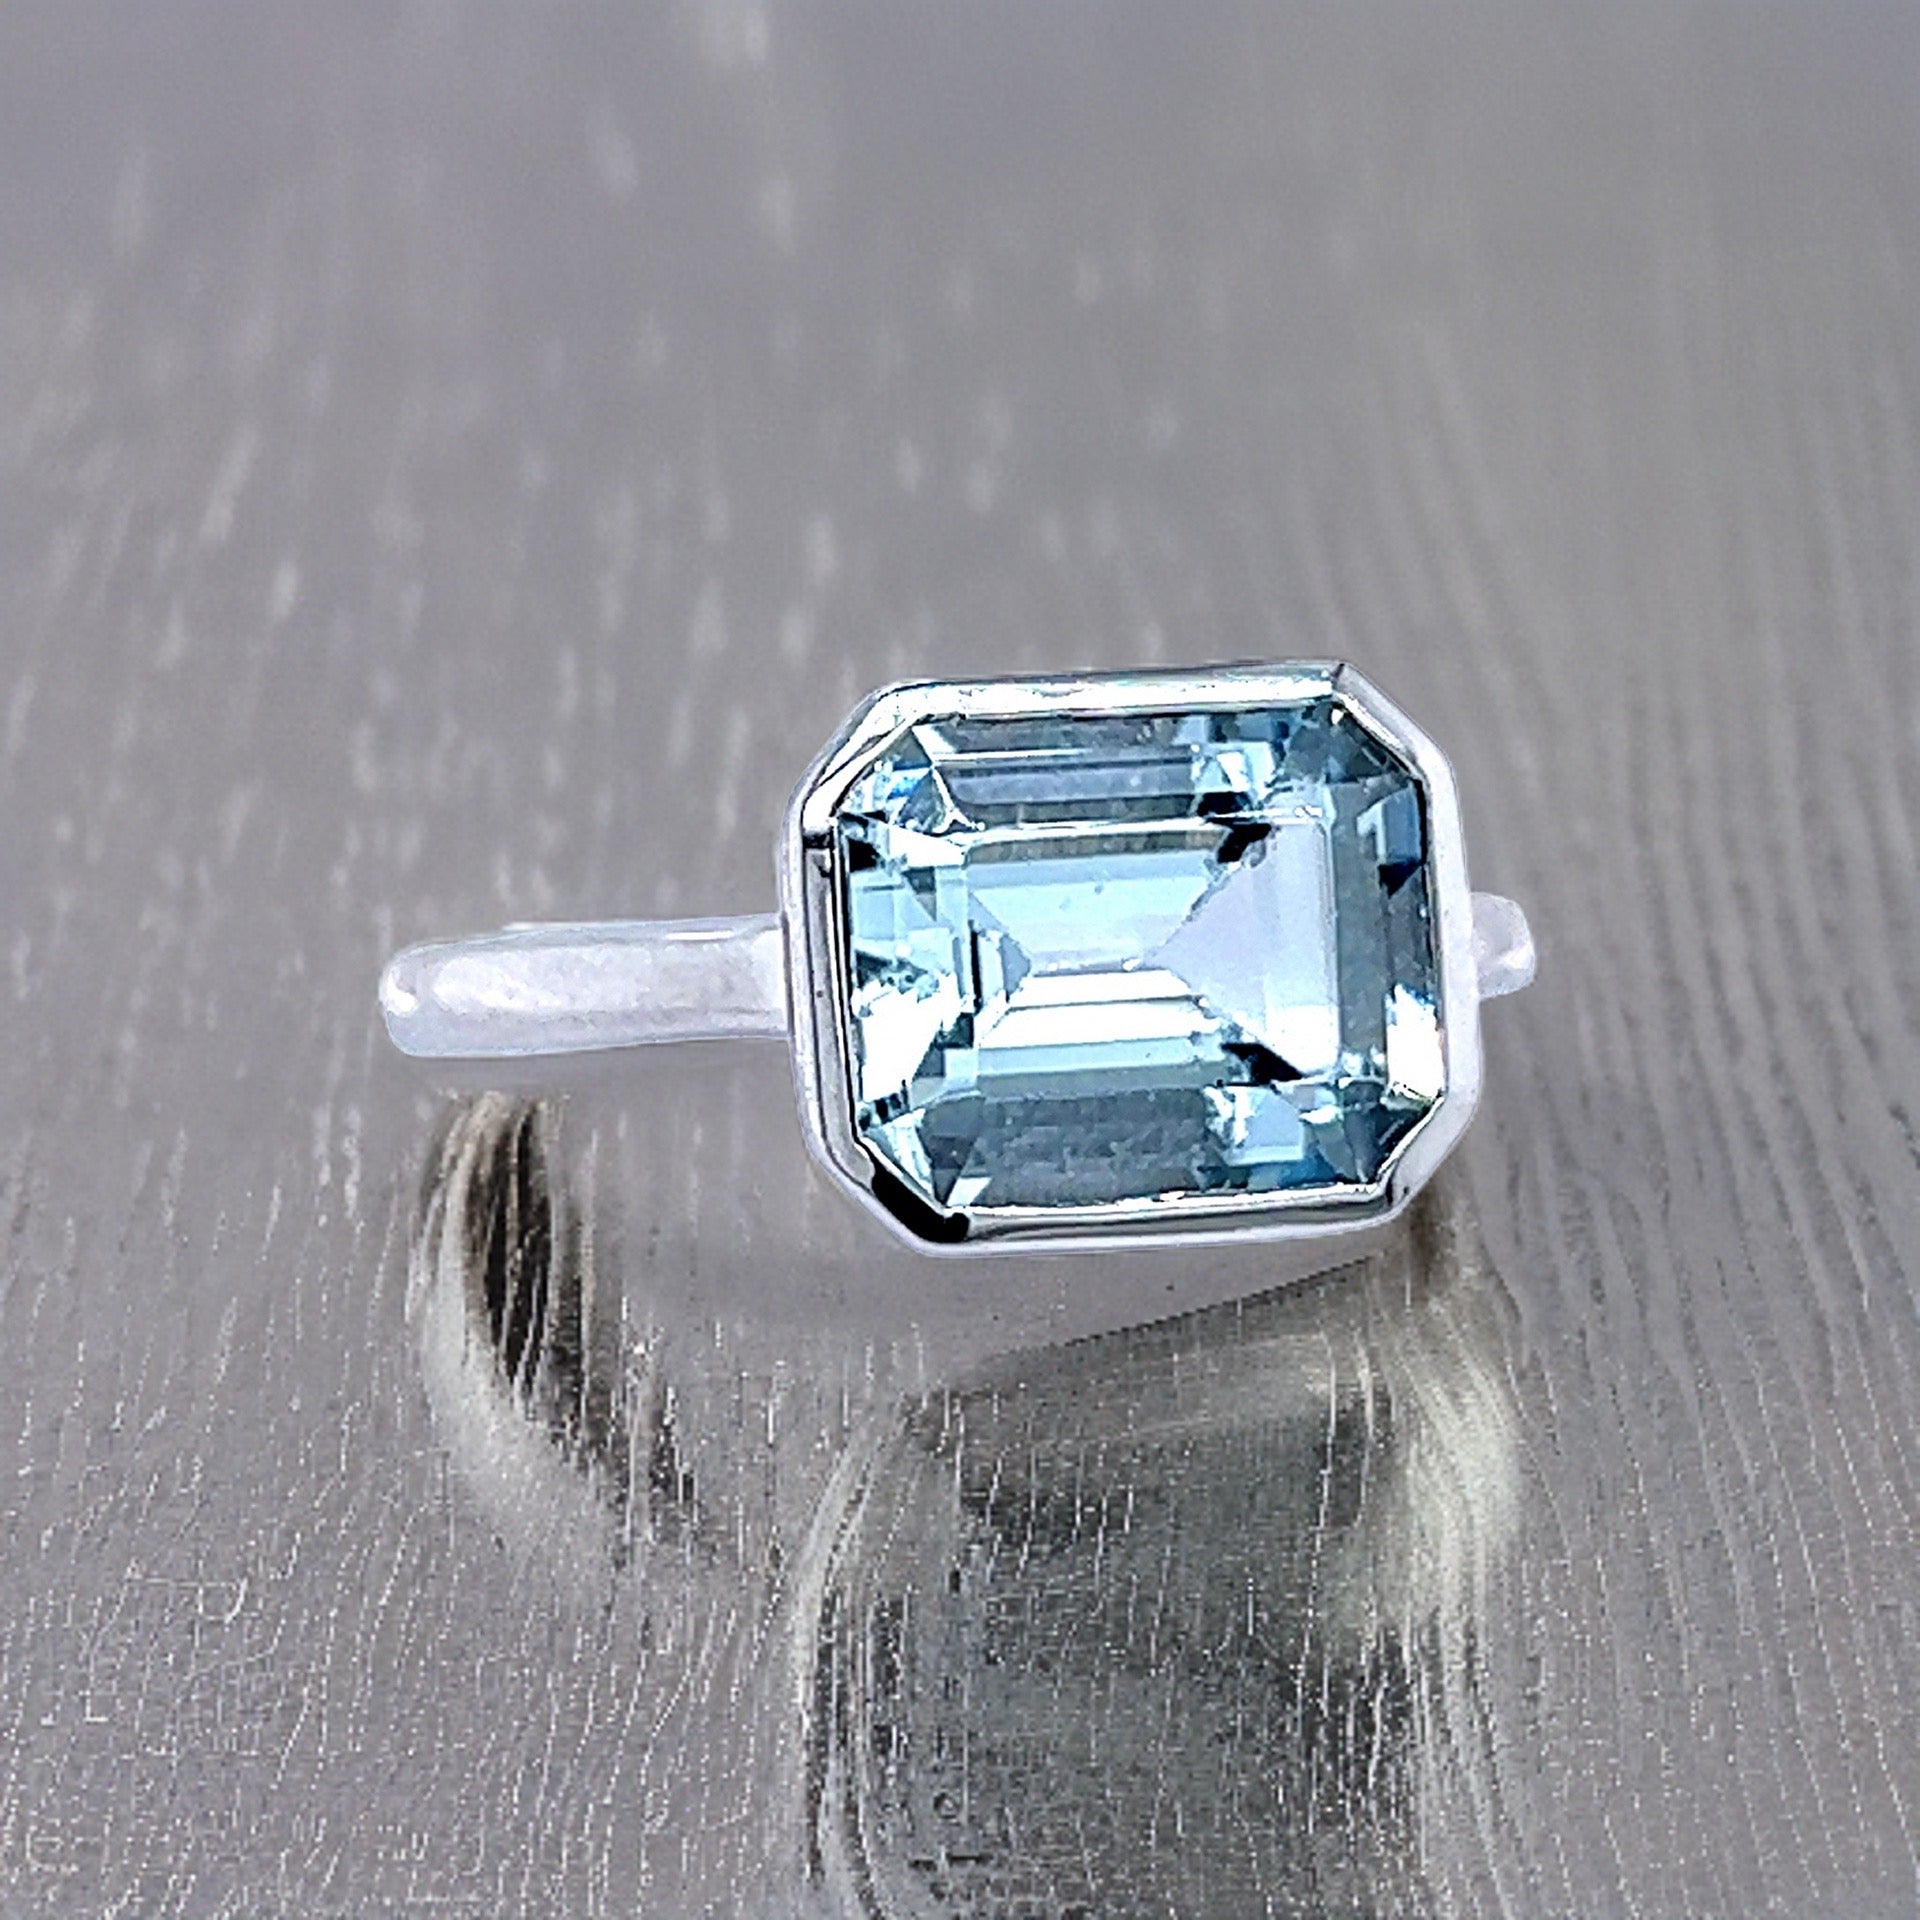 Natural Aquamarine Ring 6.5 14k White Gold 3.21 TCW Certified $2,190 221344 - Certified Fine Jewelry